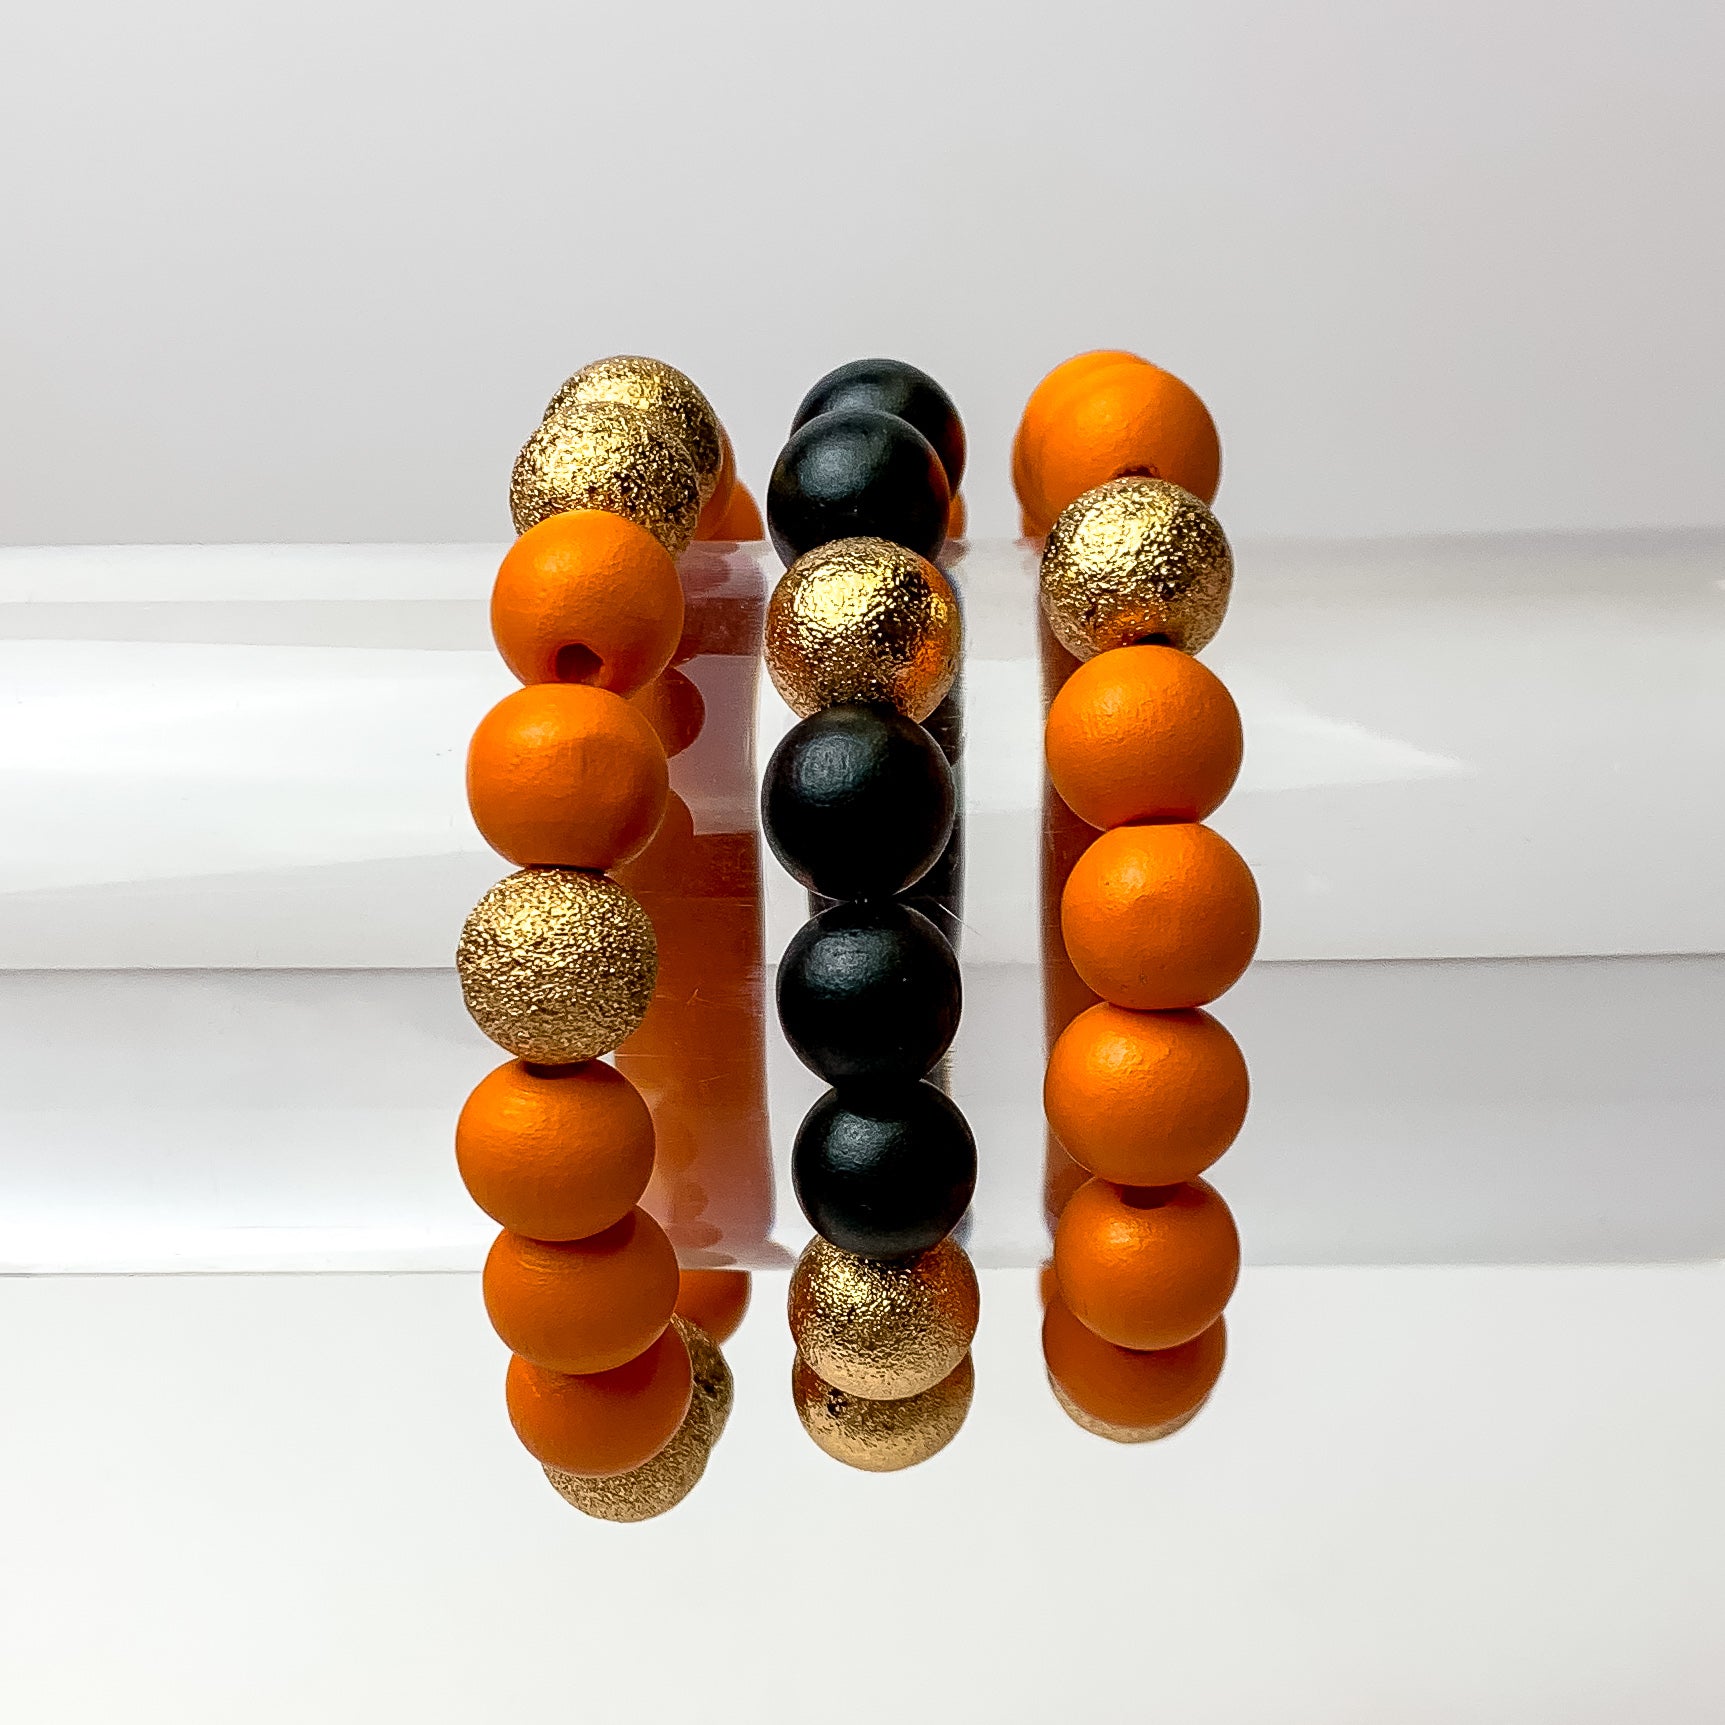 This set of 3 bracelets in the colors orange and black are placed on a clear bracelet display featuring a white background.